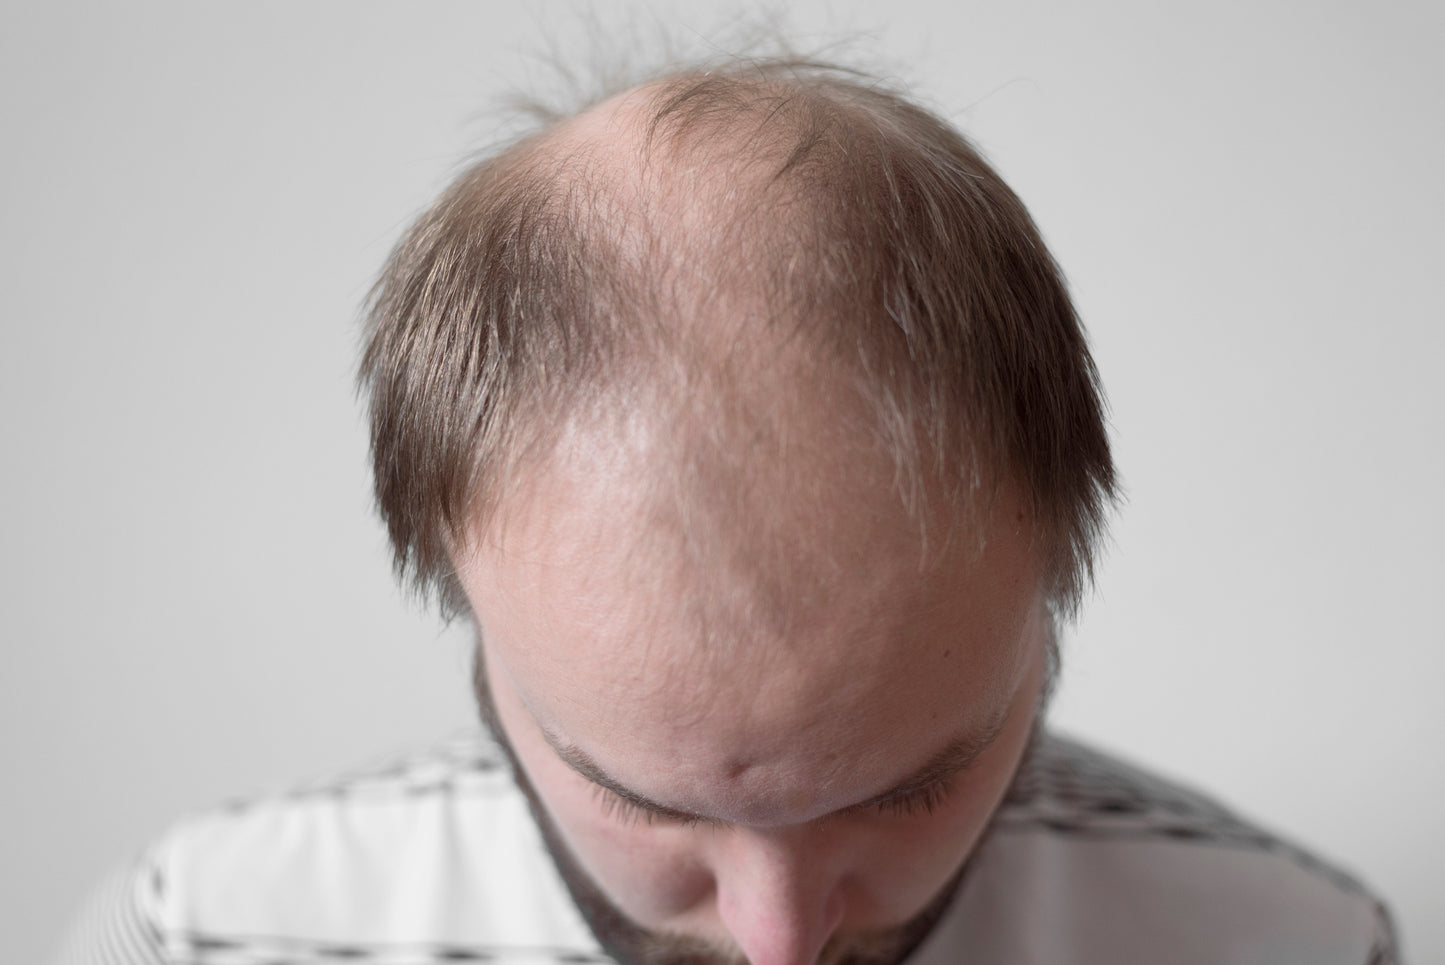 Growth of Hair After FUE | Maral Hair